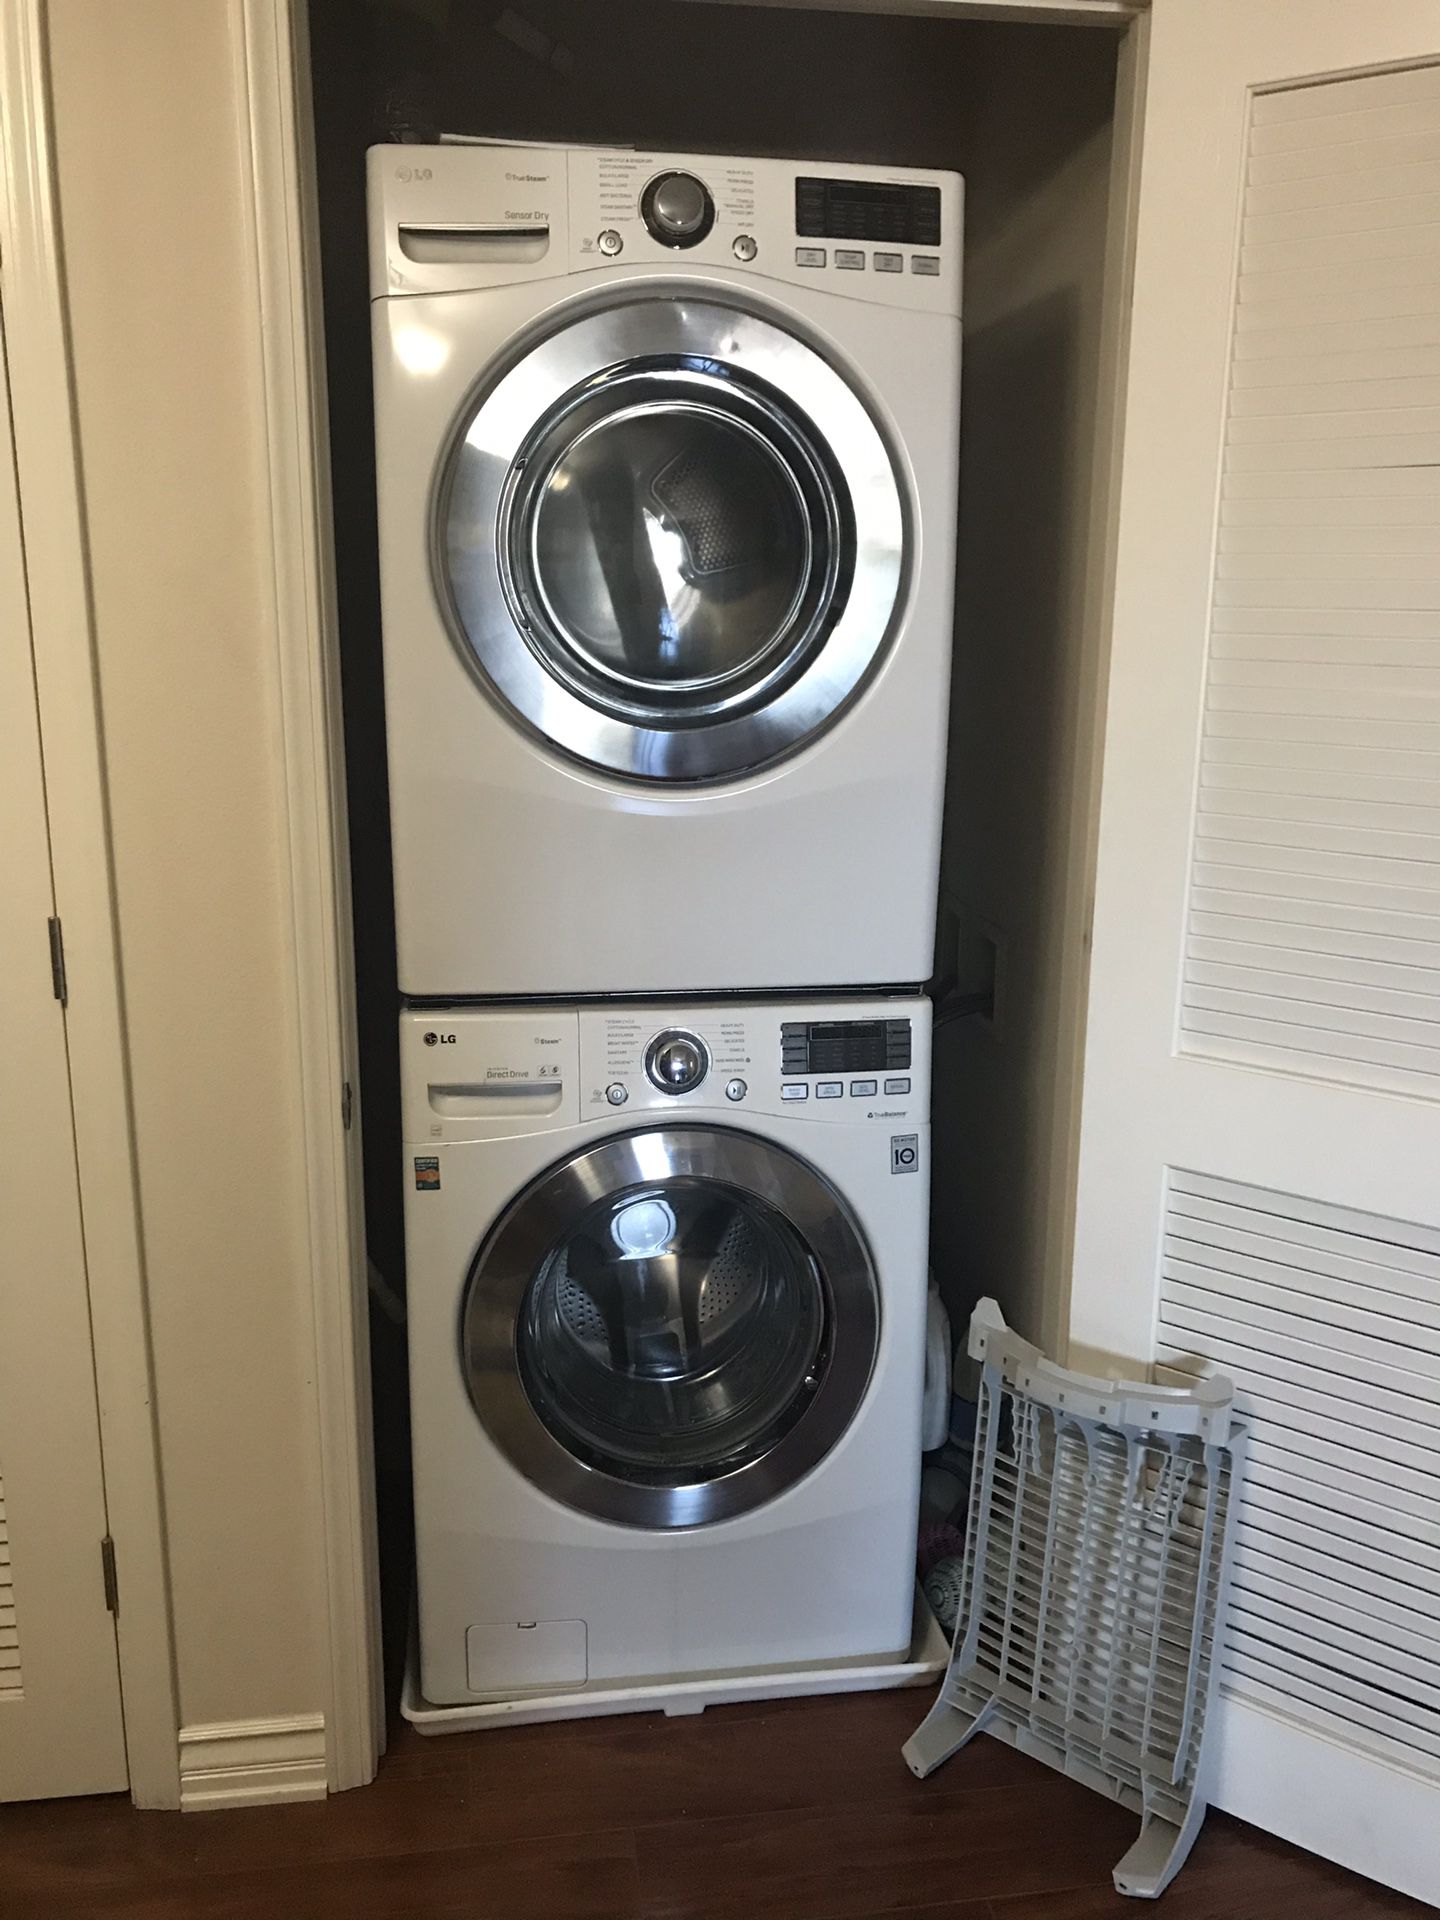 LG STACKED Washer & Dryer w TRUE STEAM & SENSOR DRY (GAS DRYER) includes Dryer Rack- WD was 2200.00 +Tx (new) Dryer Rack for delicates was 45.00 + Tx